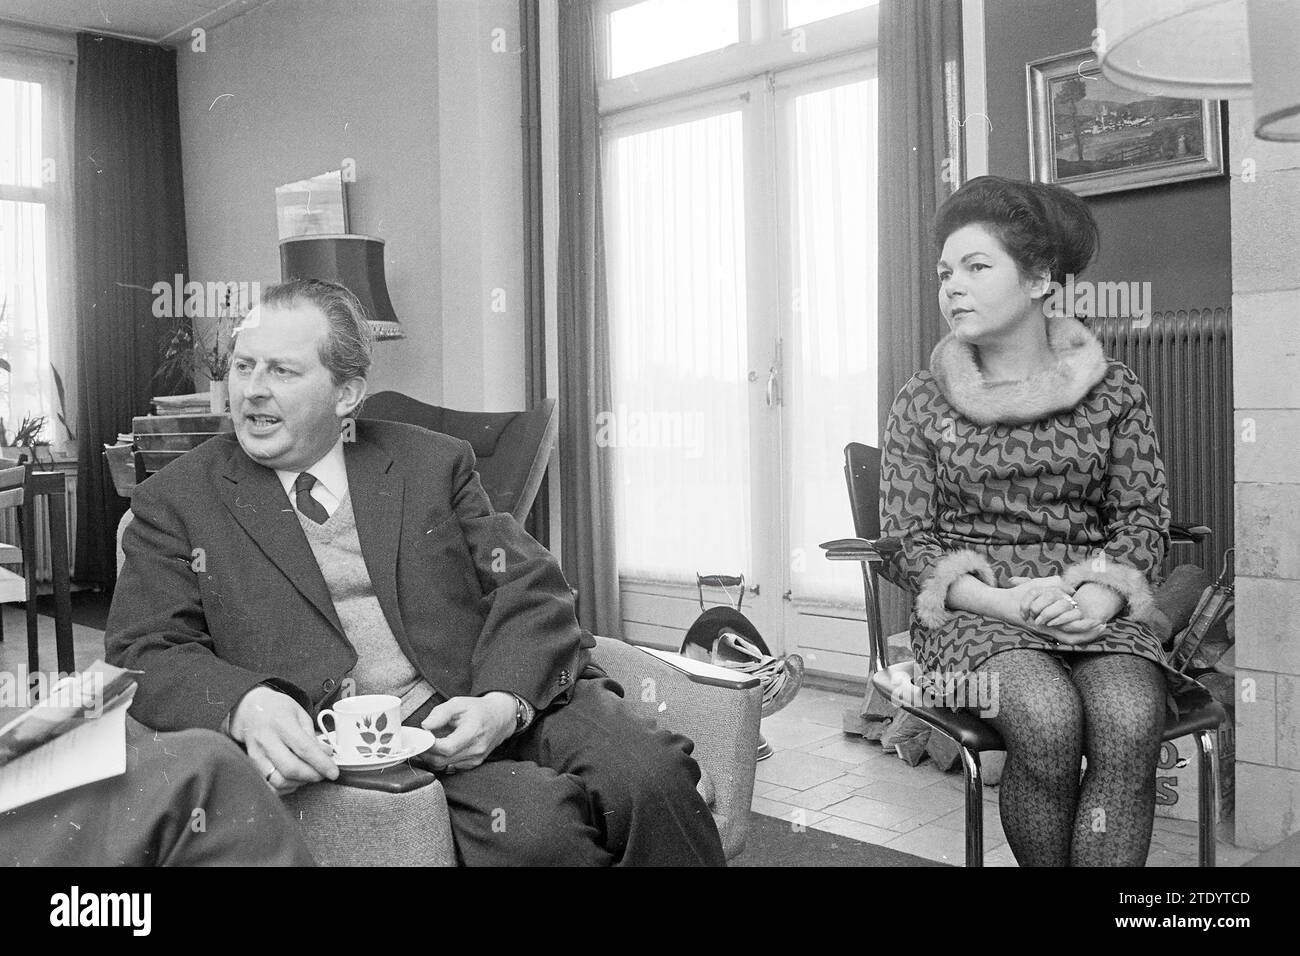 Fam Roosen, Families, Bennebroek, 14-02-1968, Whizgle News from the Past, Tailored for the Future. Explore historical narratives, Dutch The Netherlands agency image with a modern perspective, bridging the gap between yesterday's events and tomorrow's insights. A timeless journey shaping the stories that shape our future. Stock Photo